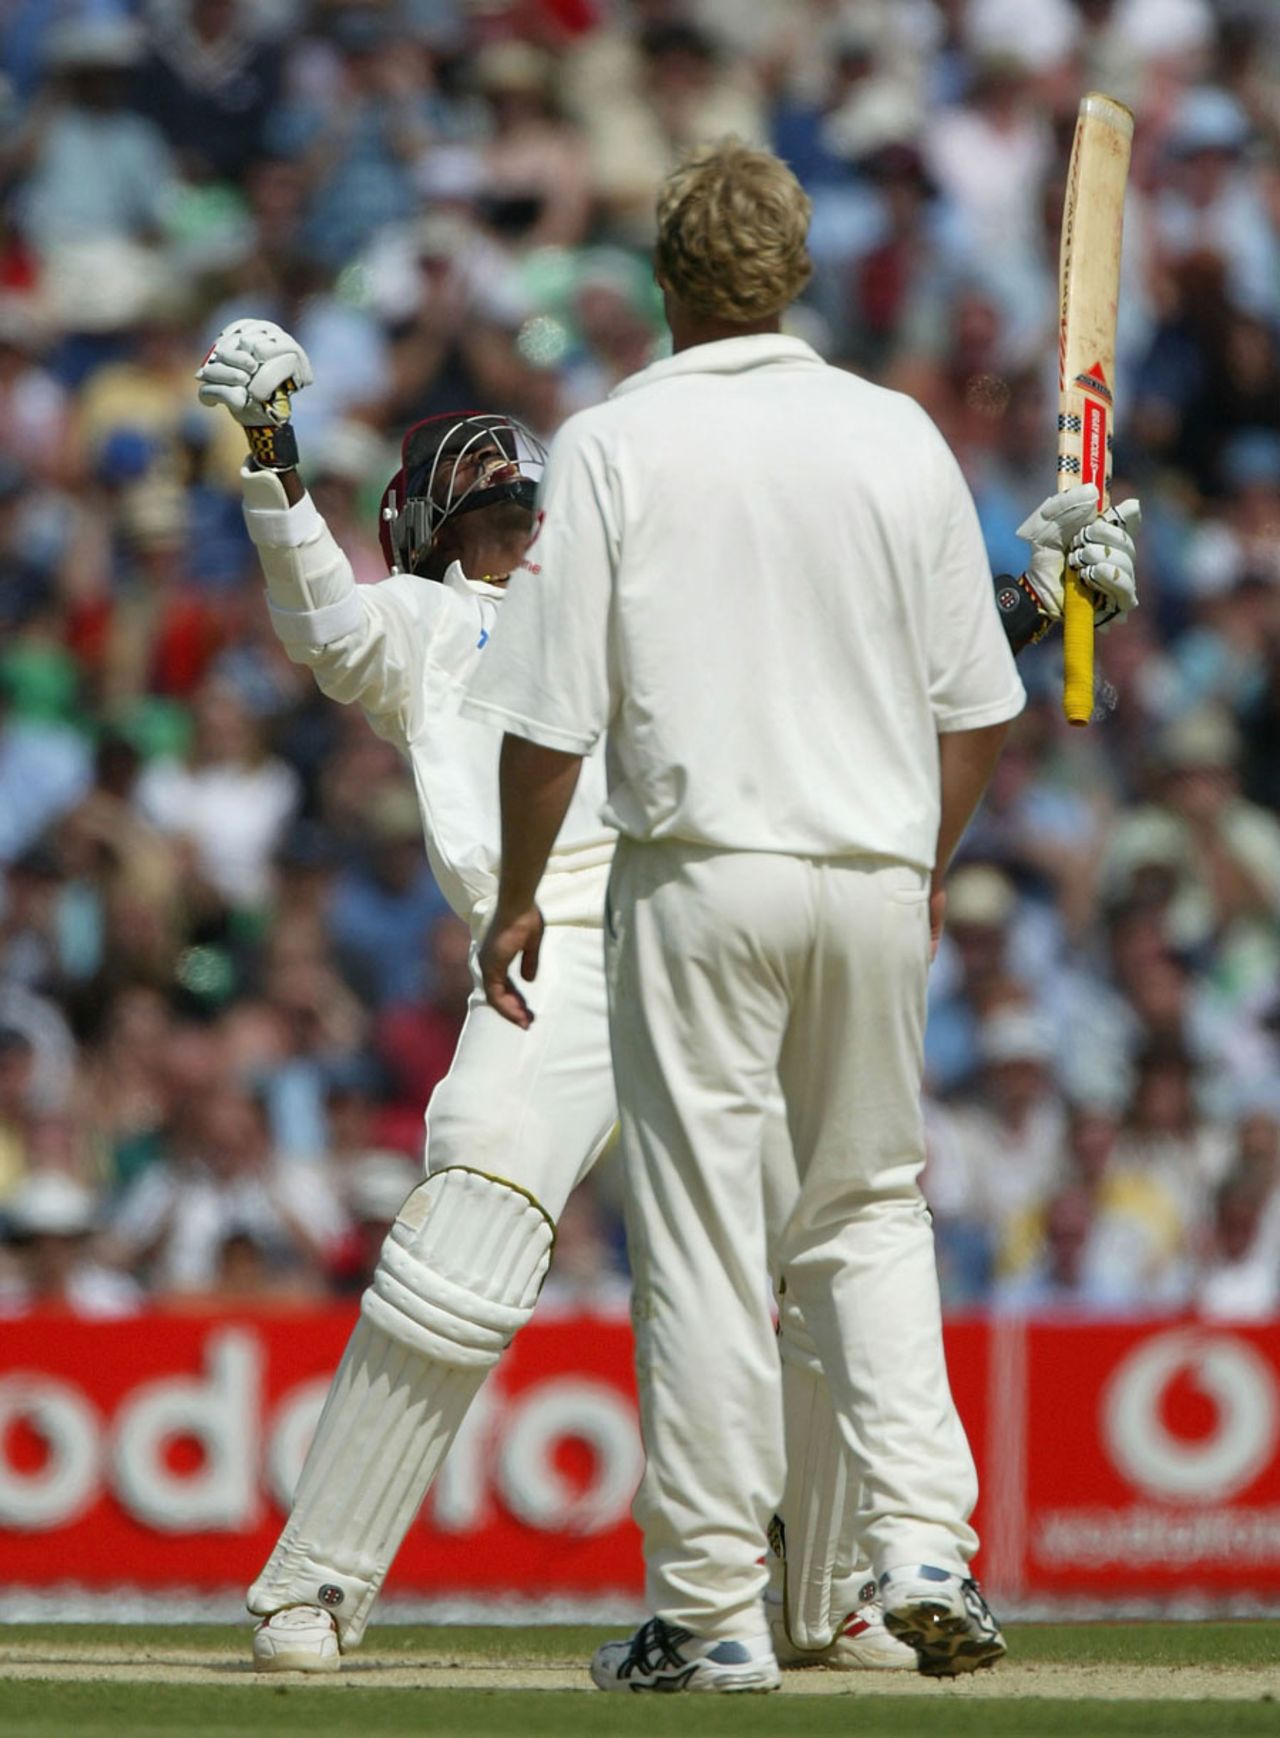 Chris Gayle is jubilant after reaching his hundred, England v West Indies, 4th Test, 3rd day, The Oval, August 21, 2004